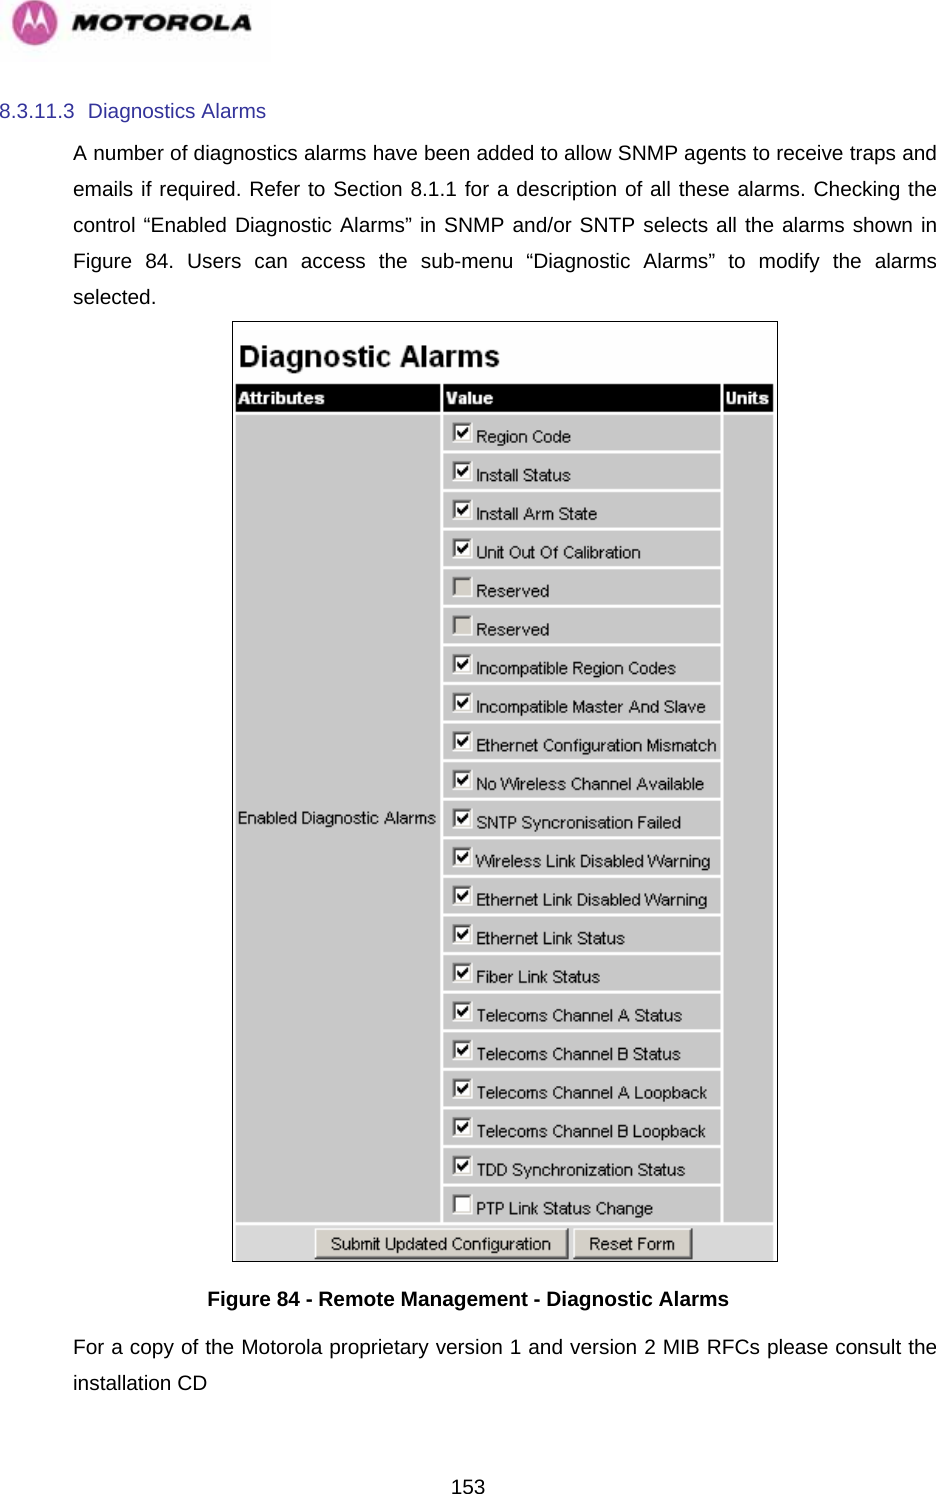   1538.3.11.3 Diagnostics Alarms A number of diagnostics alarms have been added to allow SNMP agents to receive traps and emails if required. Refer to Section 8.1.1 for a description of all these alarms. Checking the control “Enabled Diagnostic Alarms” in SNMP and/or SNTP selects all the alarms shown in Figure 84. Users can access the sub-menu “Diagnostic Alarms” to modify the alarms selected.   Figure 84 - Remote Management - Diagnostic Alarms For a copy of the Motorola proprietary version 1 and version 2 MIB RFCs please consult the installation CD 